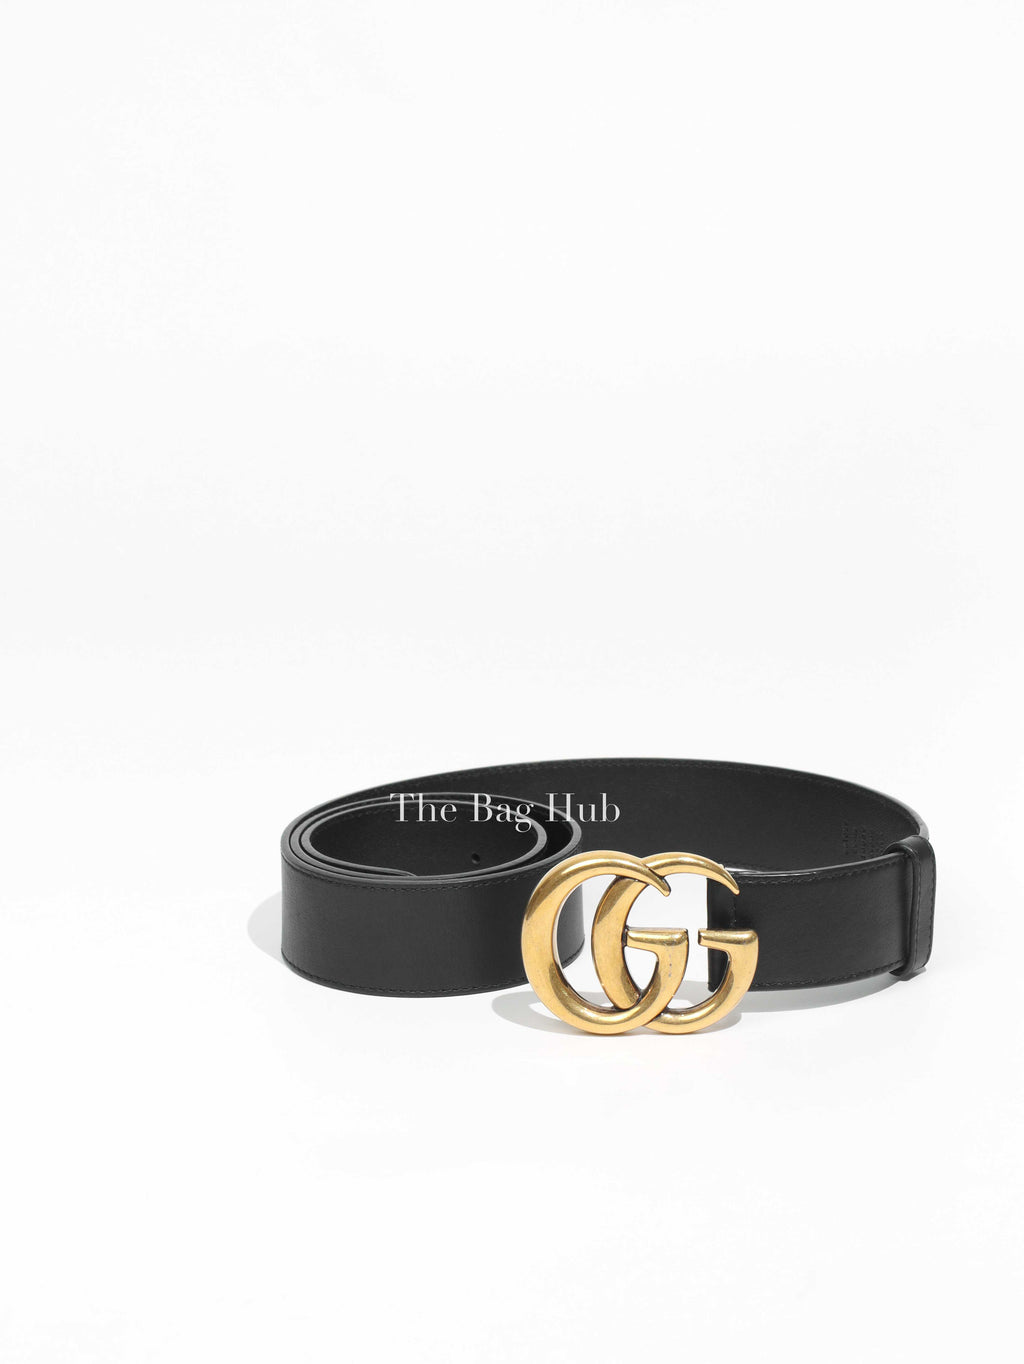 Gucci Black Leather GG Marmont Belt Shiny GHW Size 80 x 32